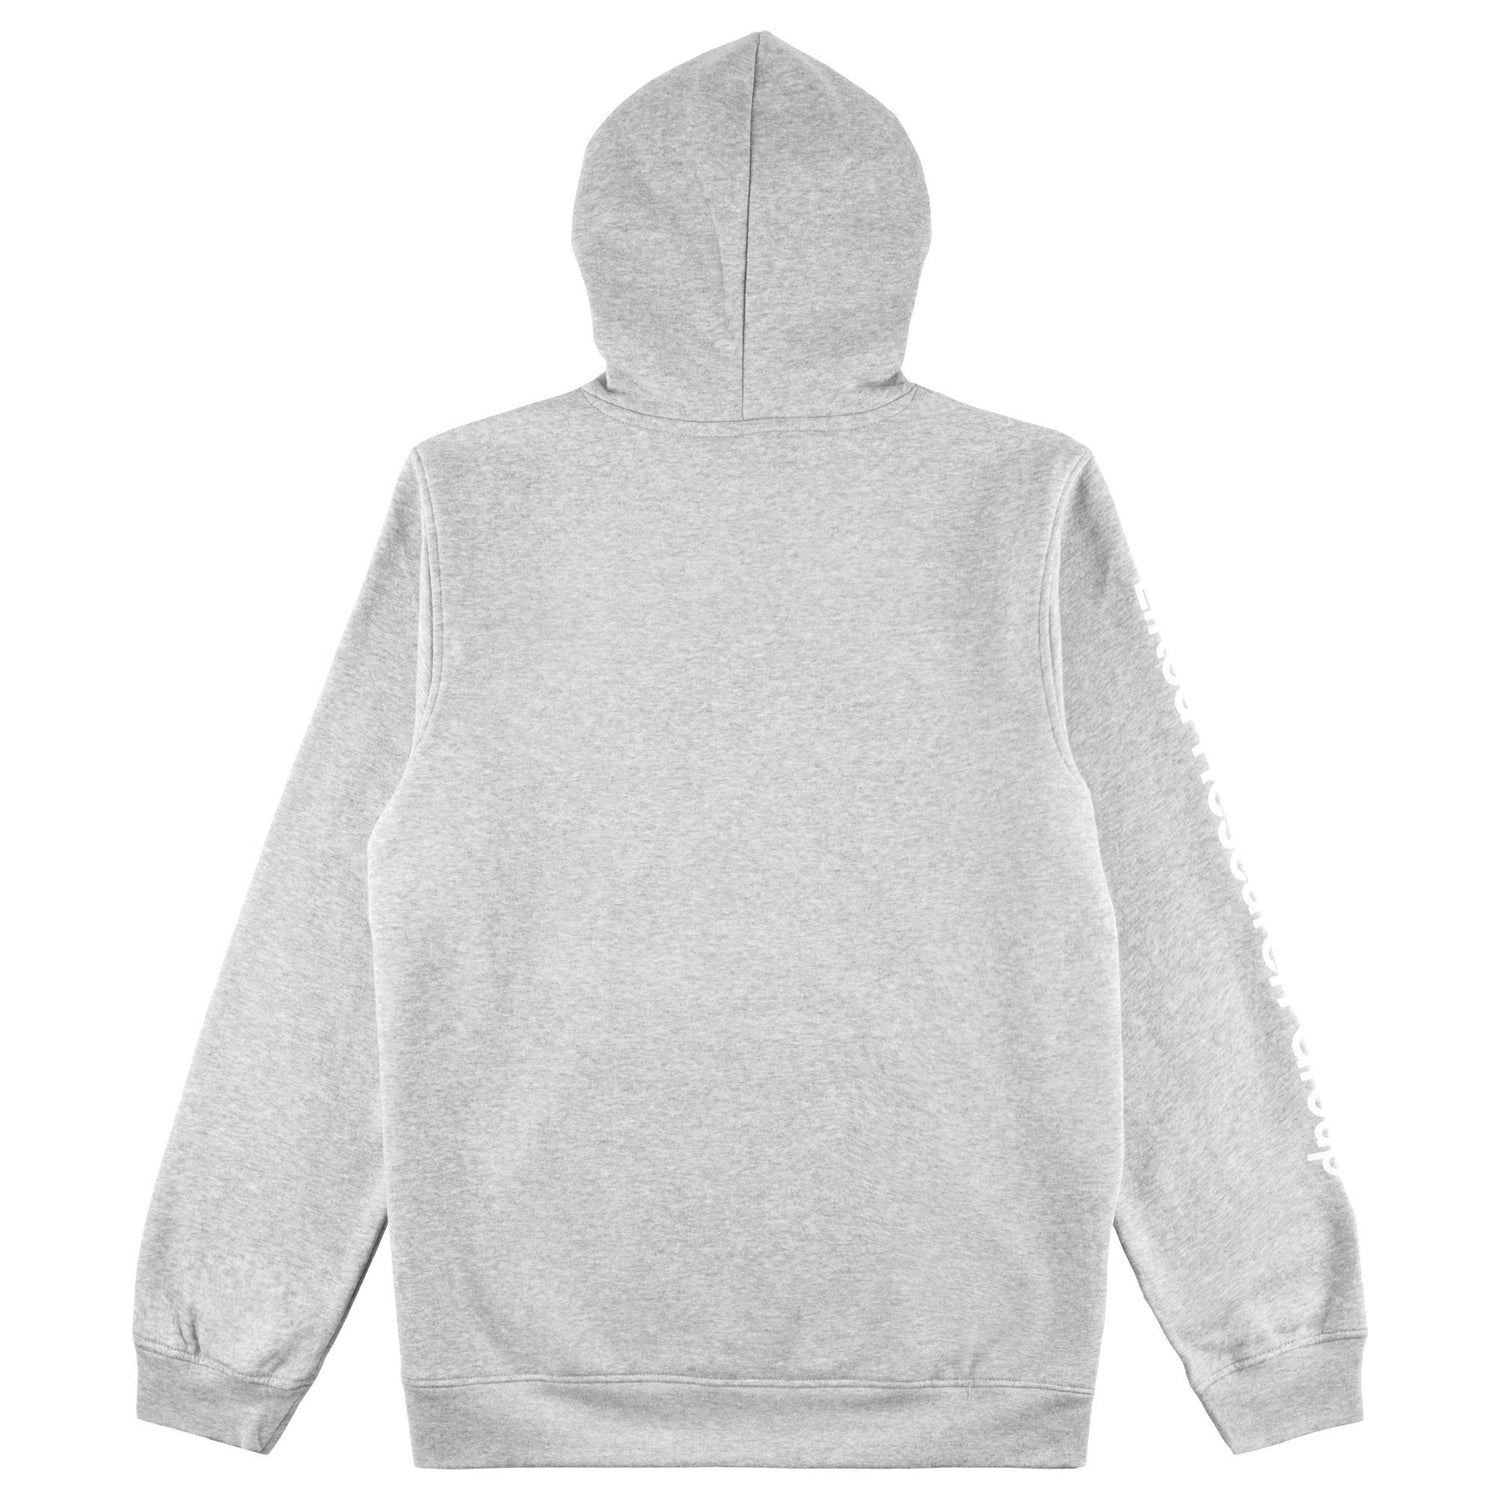 LIFTED SCRIPT PULLOVER HOODIE - HEATHER GREY